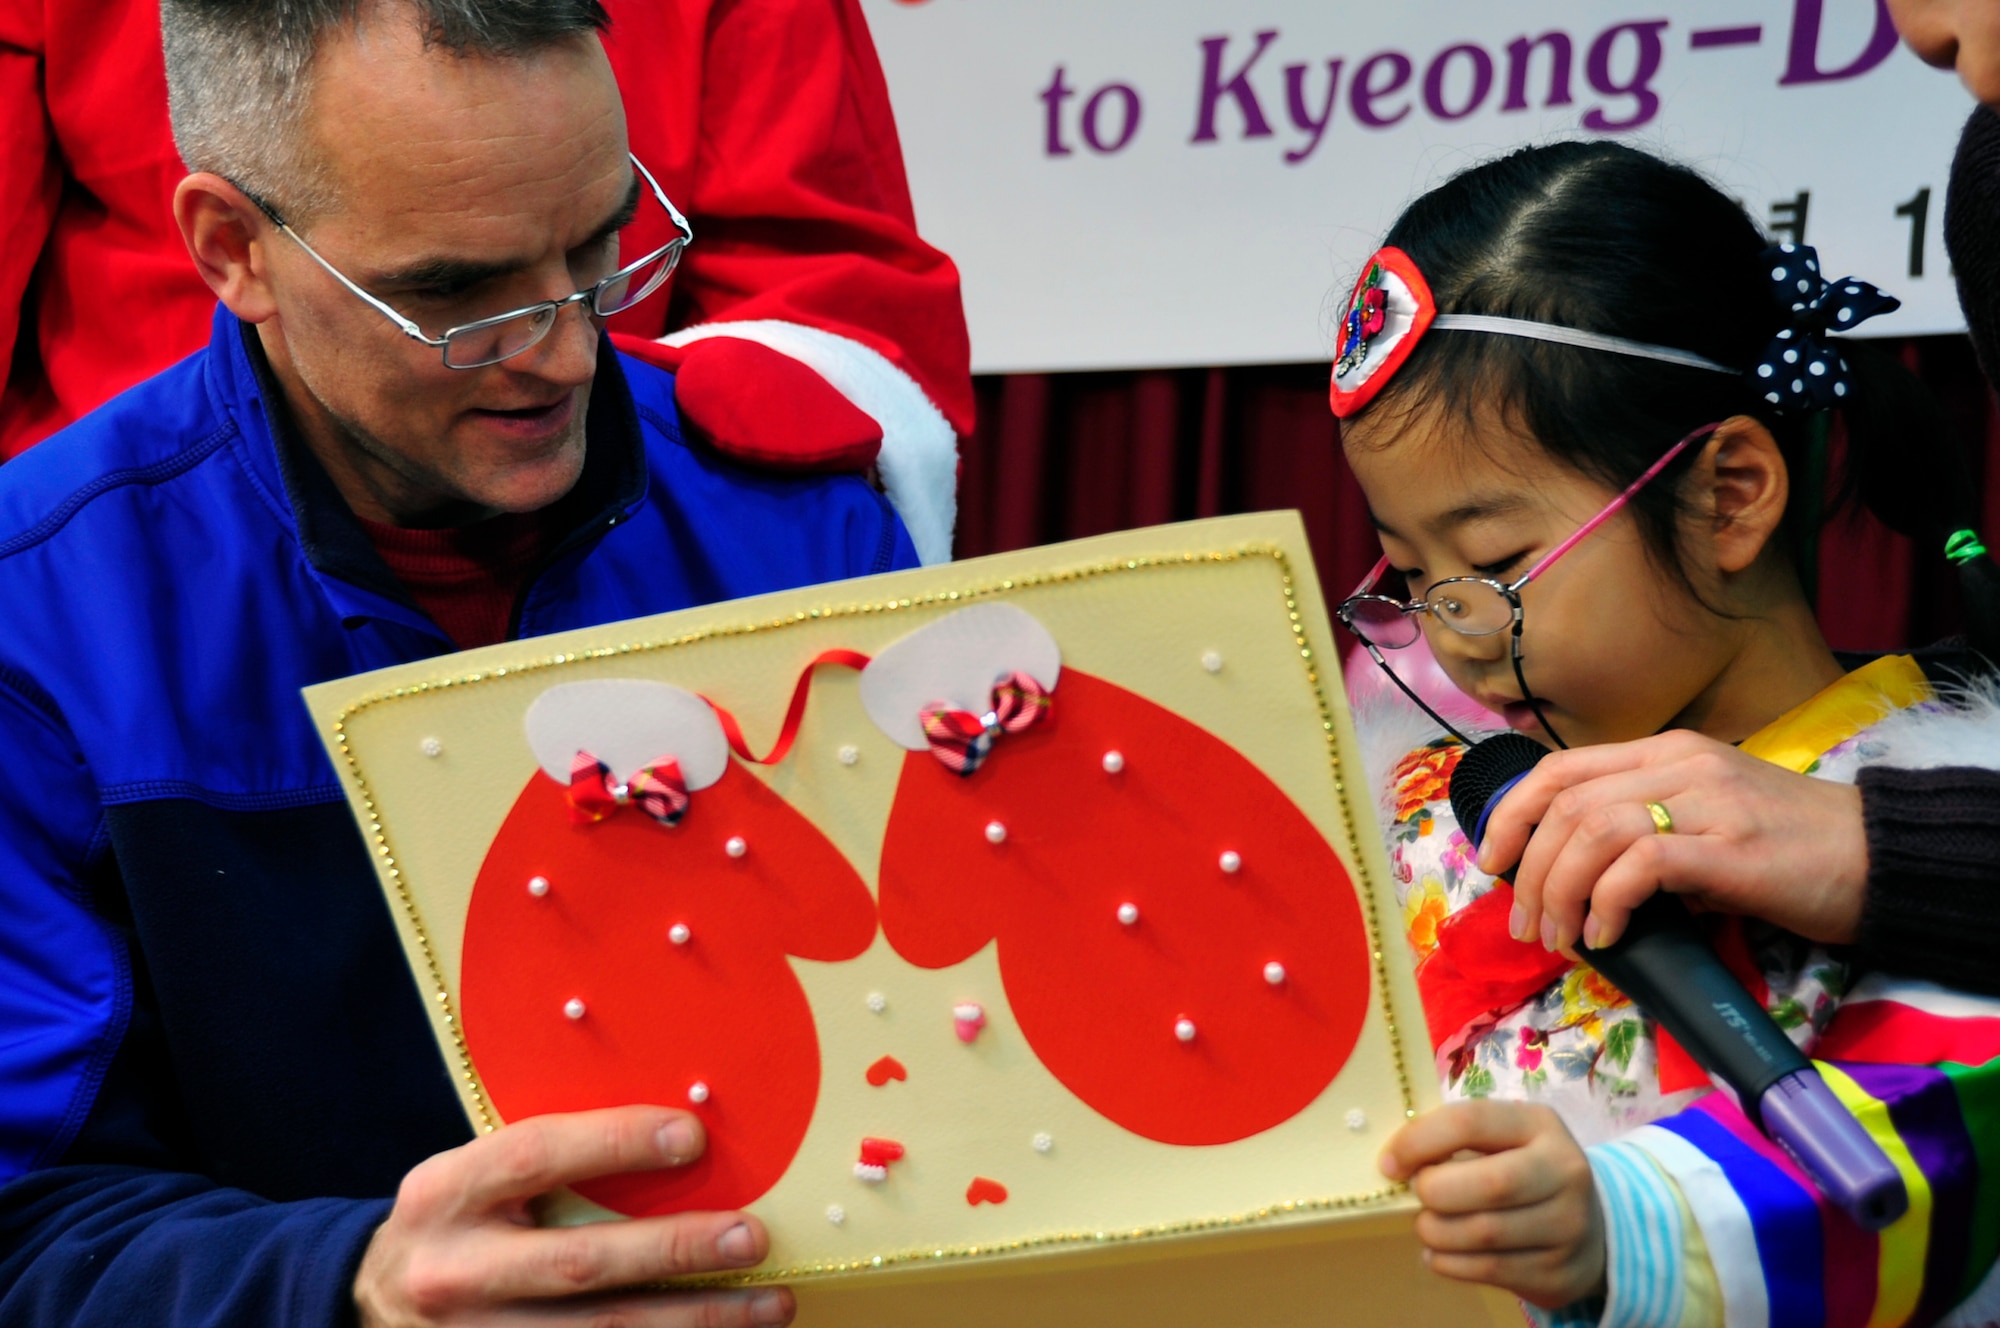 Chaplain (Capt.) Daniel Forman, 51st Fighter Wing chaplain, accepts a handmade card from a Korean girl at a local orphanage Dec. 22, 2012. Through Operation Christmas Hope, 20 orphanages and more than 2,000 children were visited. (U.S. Air Force photo/Airman 1st Class Alexis Siekert)